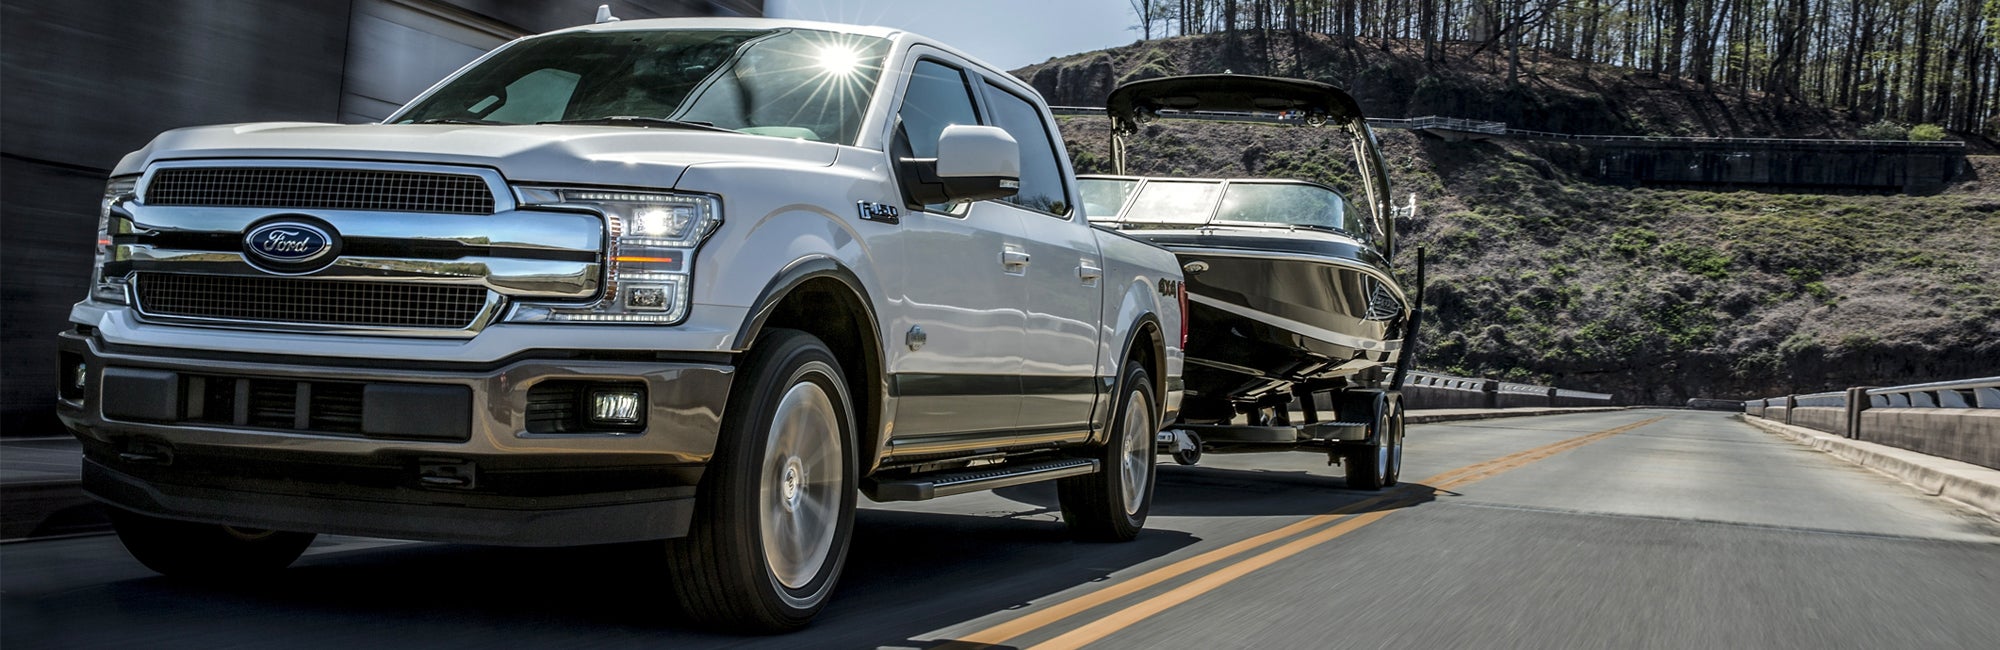 2020 Ford F-150 | Towing Capacity & More | Buss Ford 2020 Ford F150 3.5 L Towing Capacity